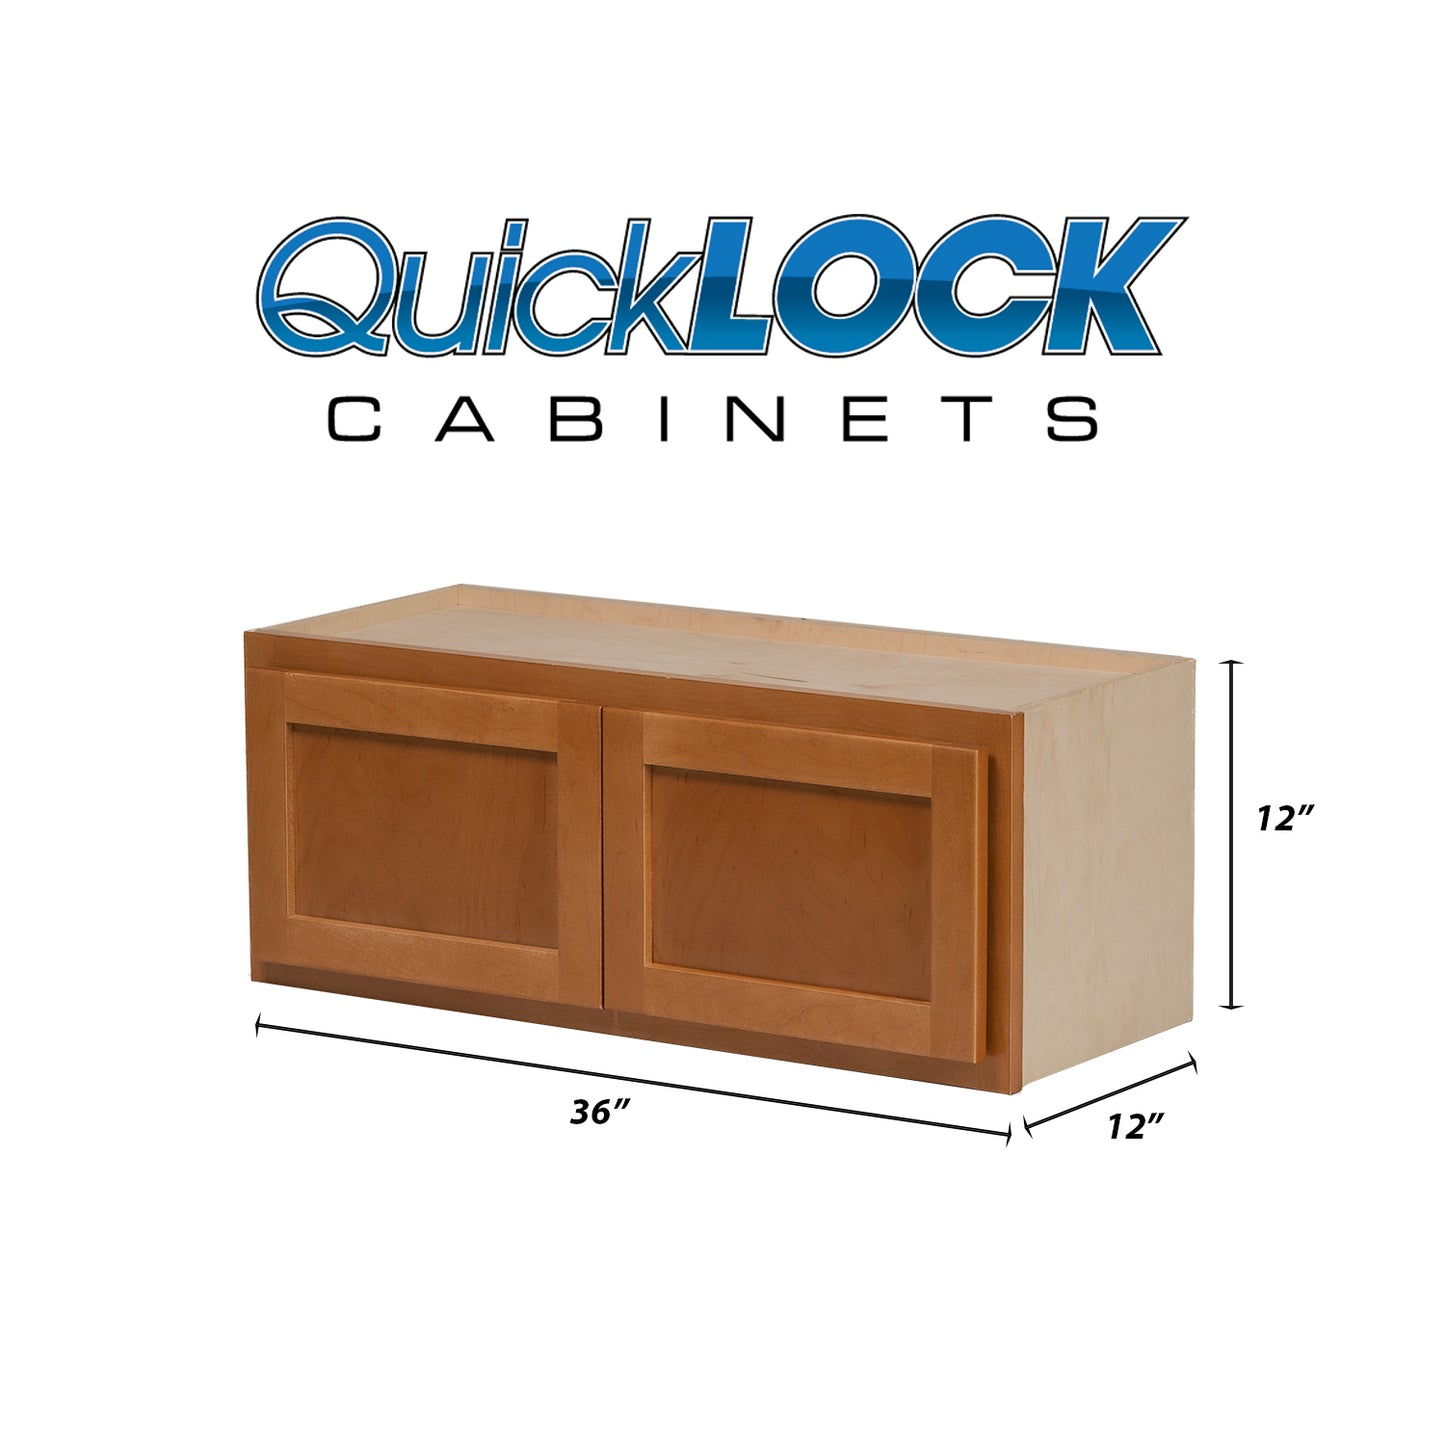 Quicklock RTA (Ready-to-Assemble) Provincial Stain 36"Wx12"Hx12"D Refrigerator Wall Cabinet